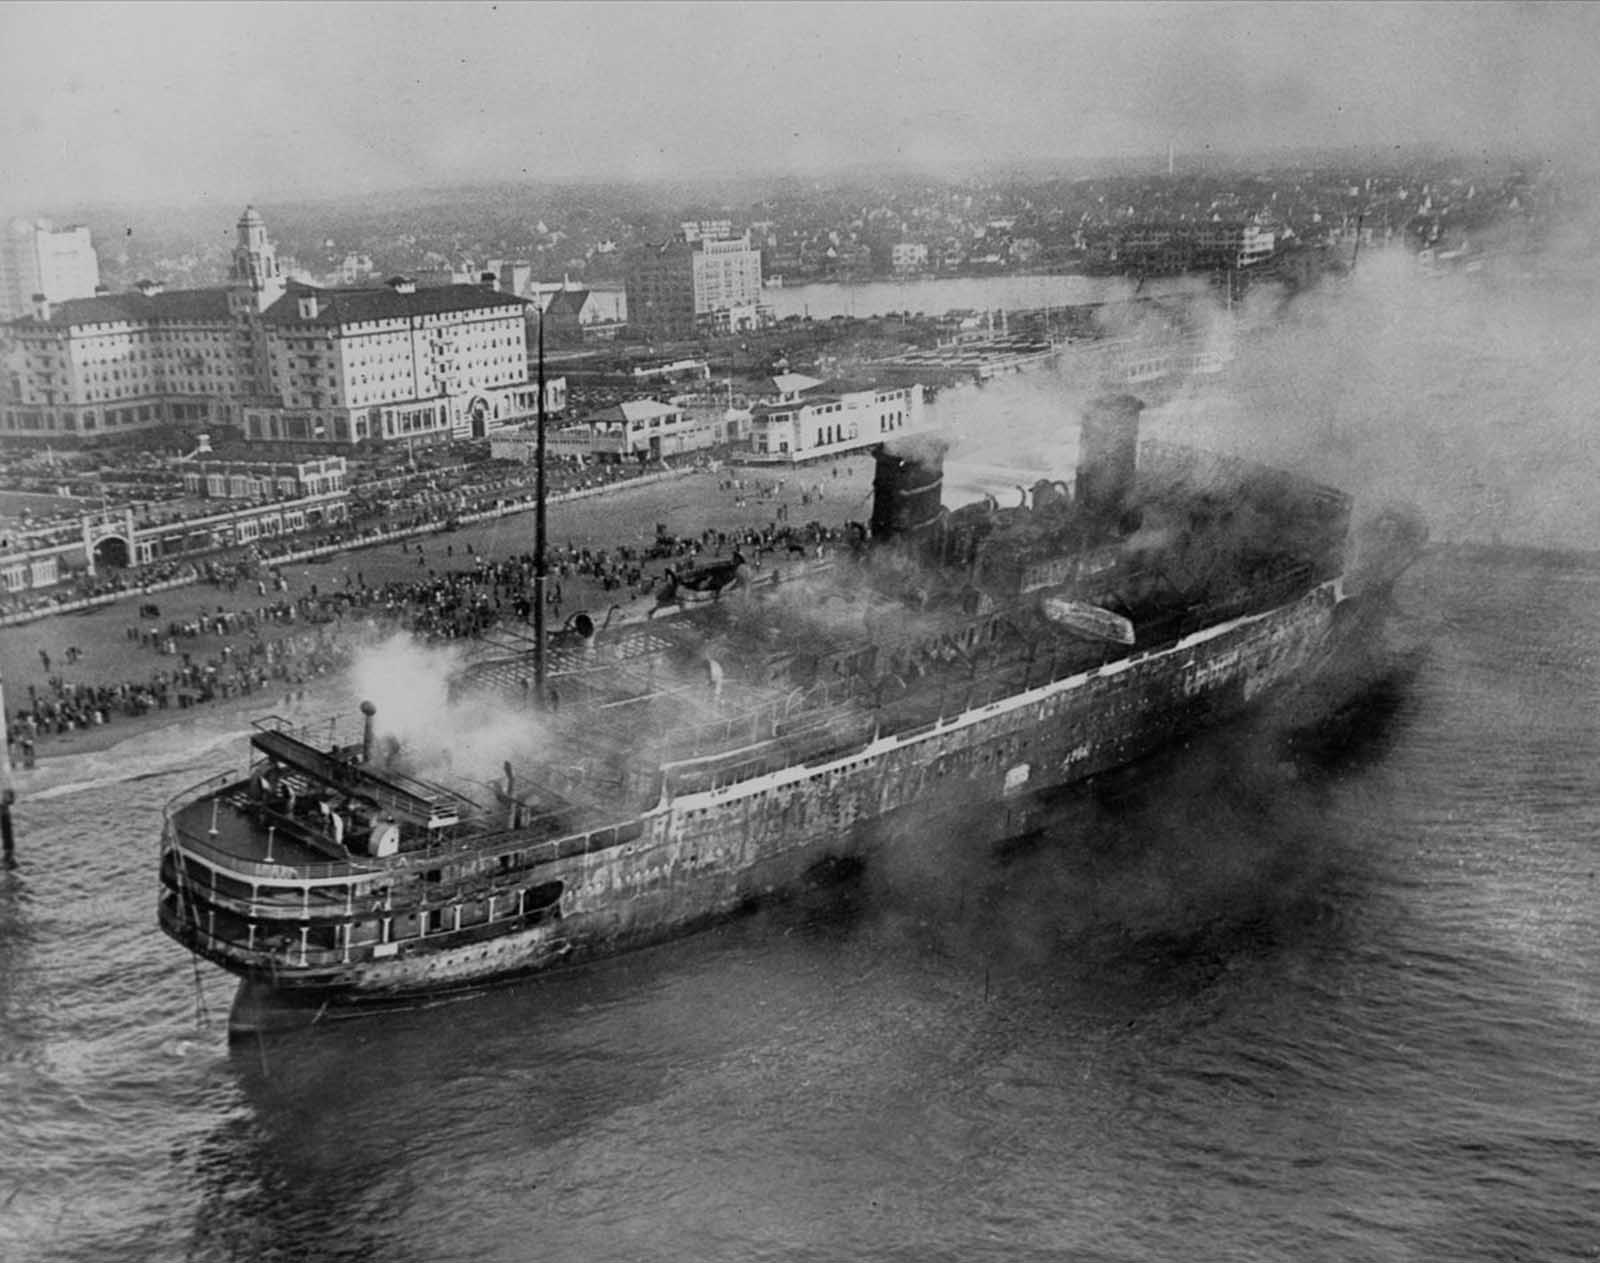 SS Morro Castle burnt and shipwrecked off the coast of New Jersey, 1934